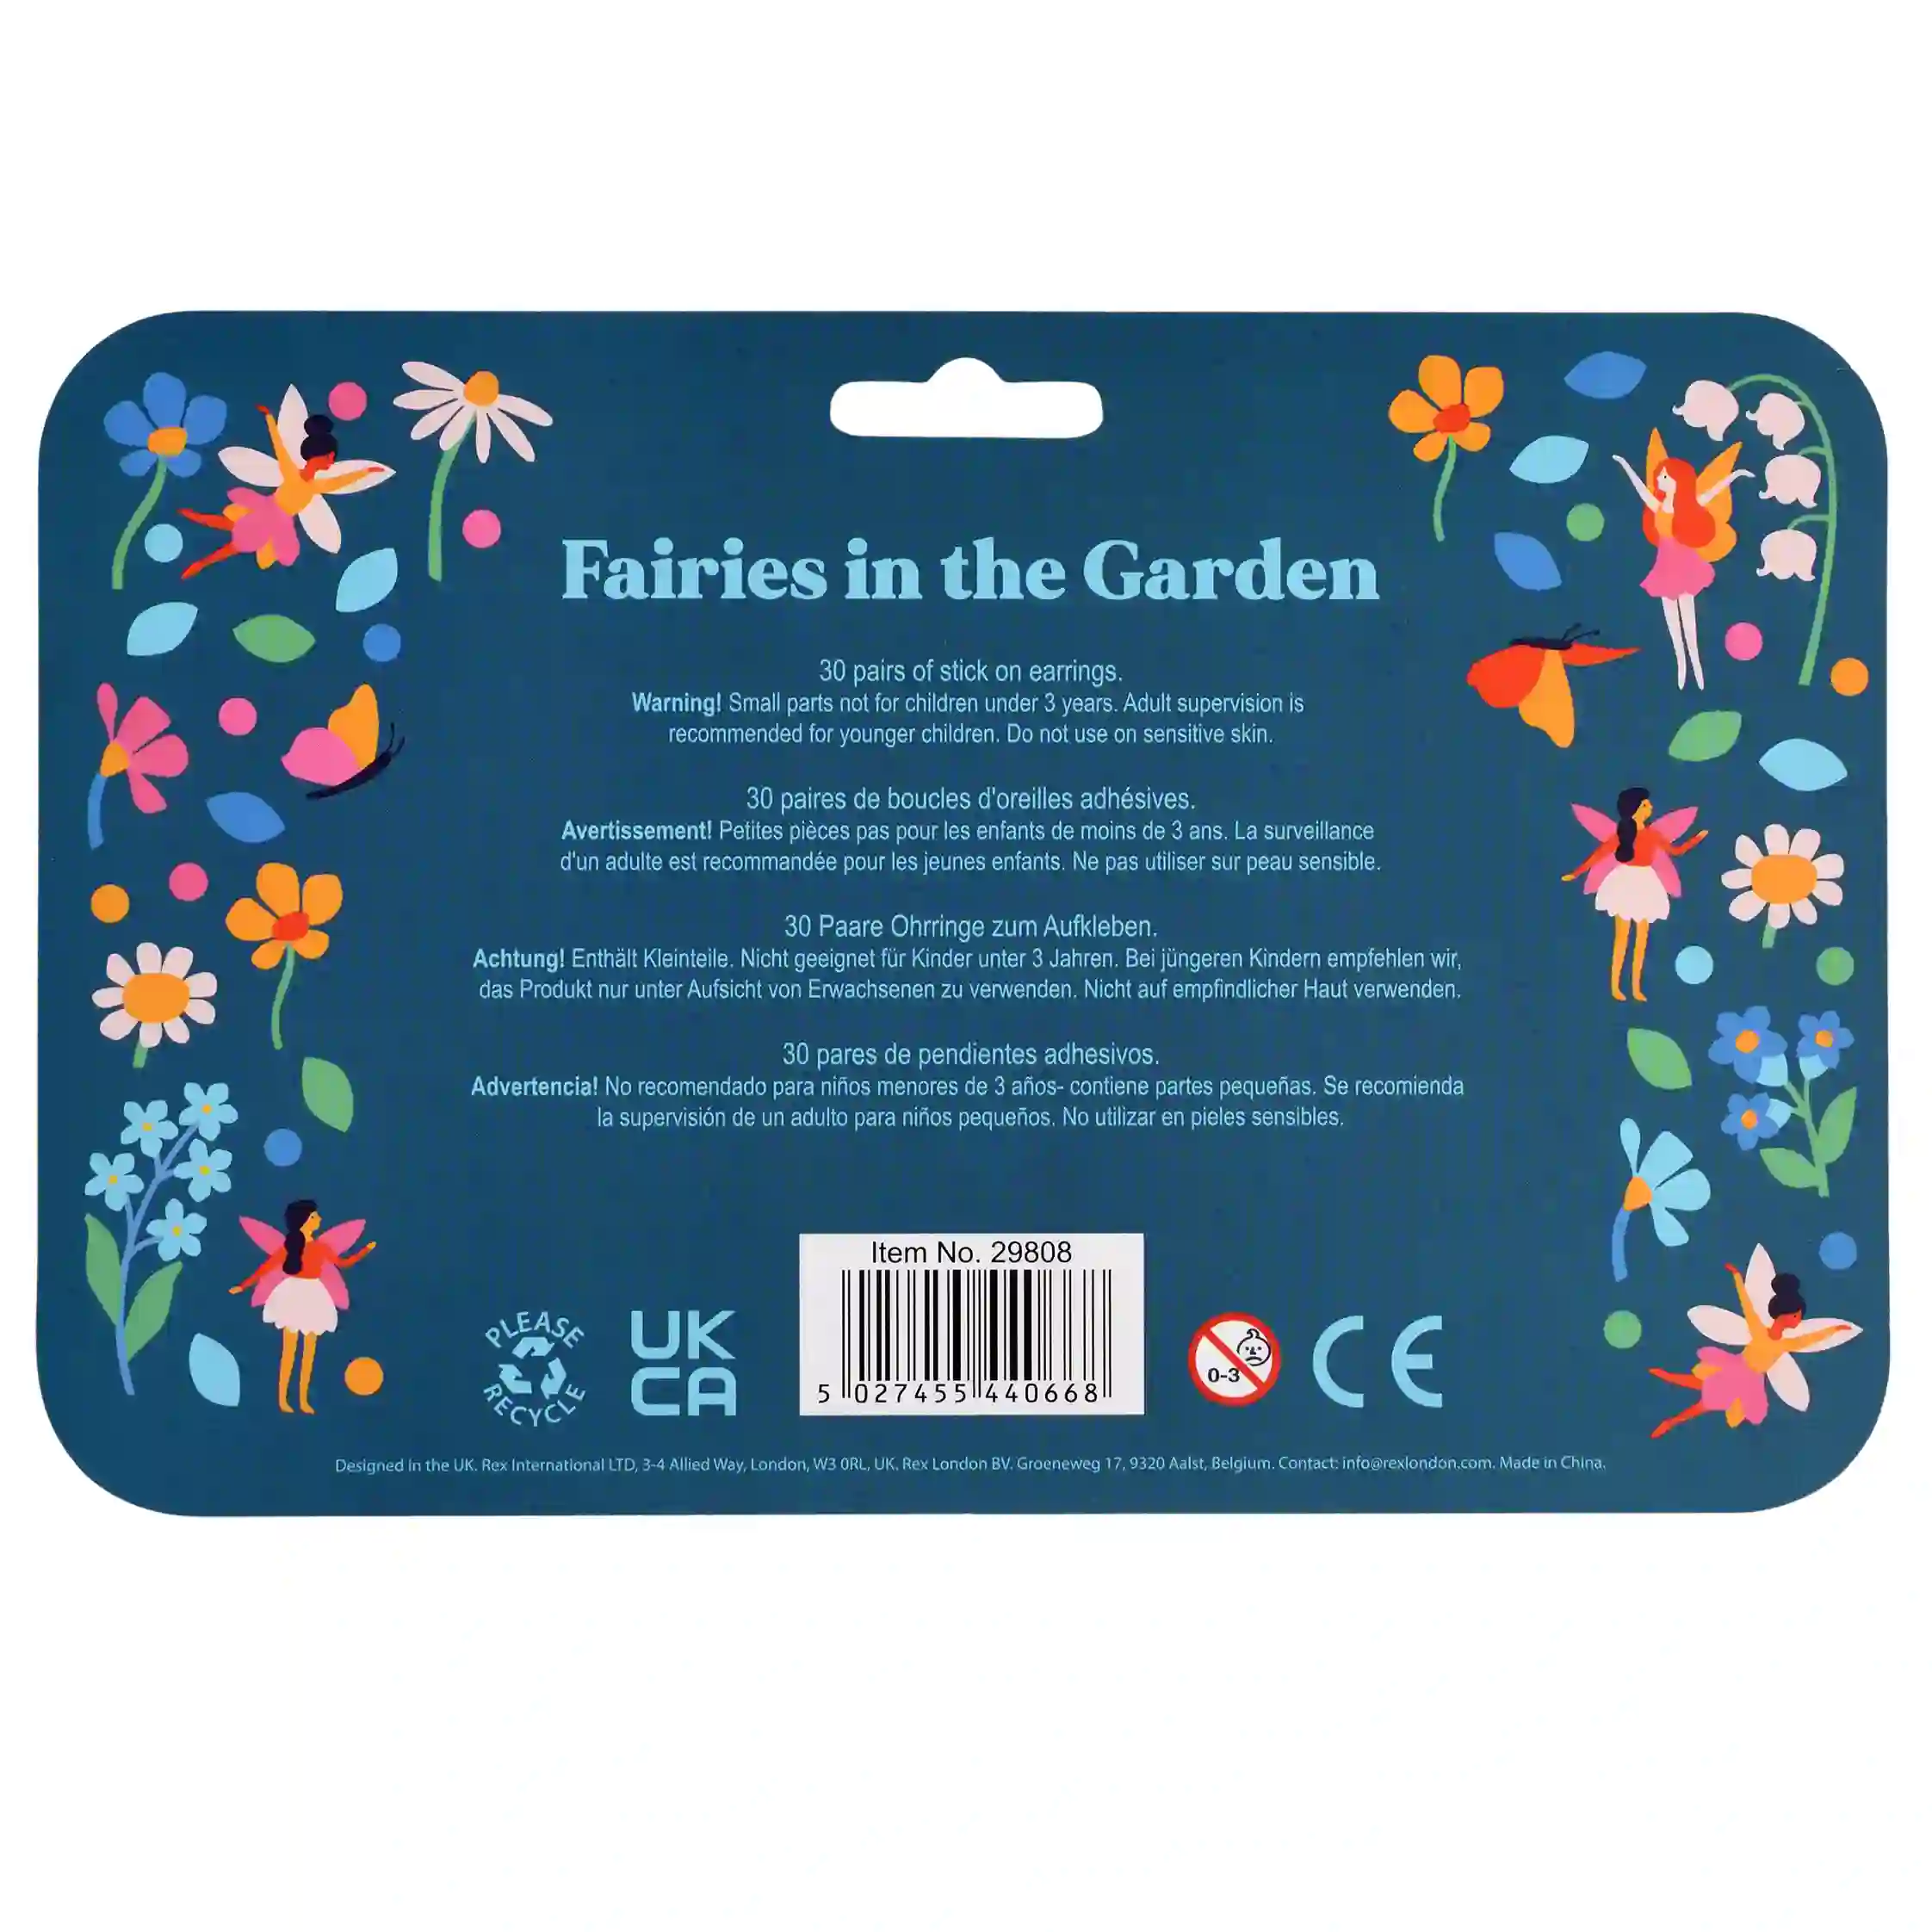 stick on earrings (30 pairs) - fairies in the garden